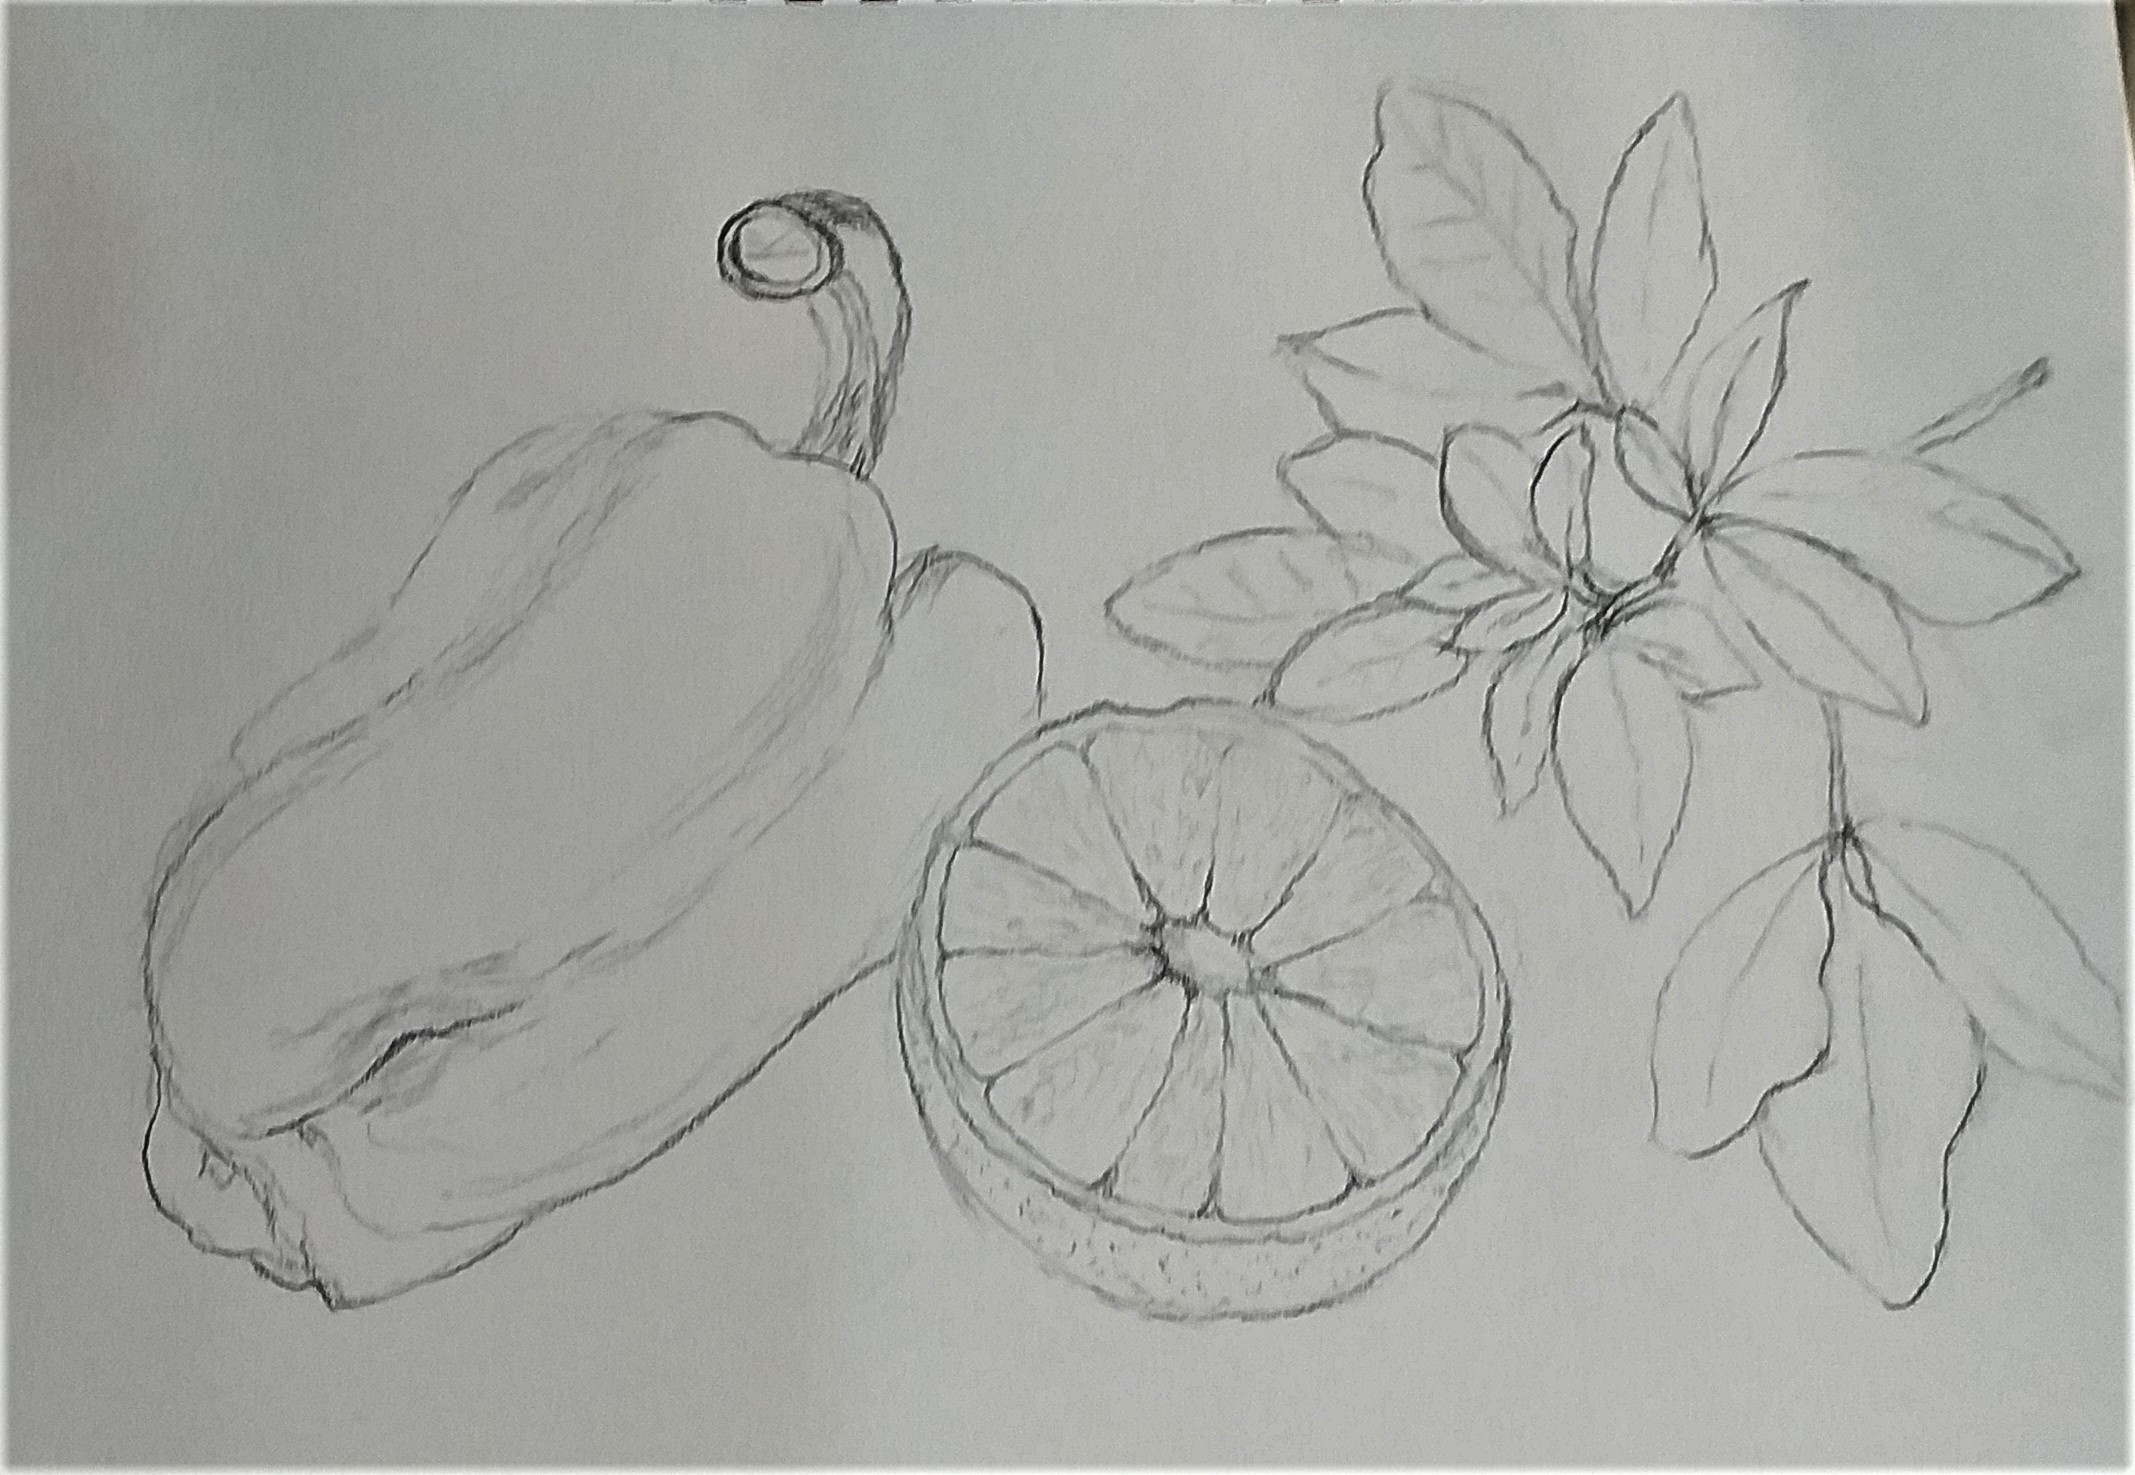  Karen's drawing of natural forms produced at Raya's Art course in Kidderminster